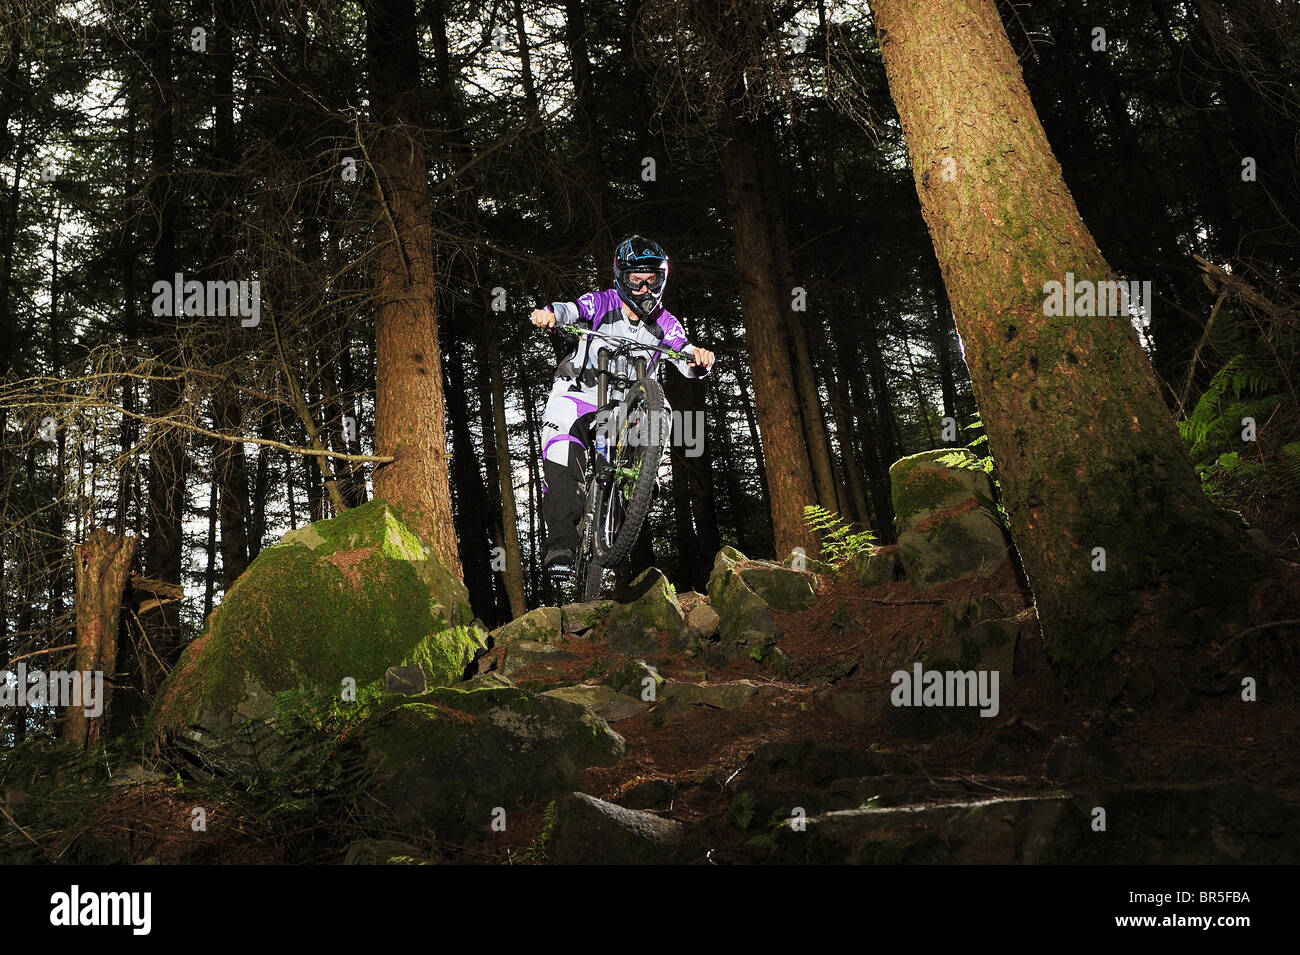 A downhill mountain biker rides over rocks between trees in forestry. Stock Photo